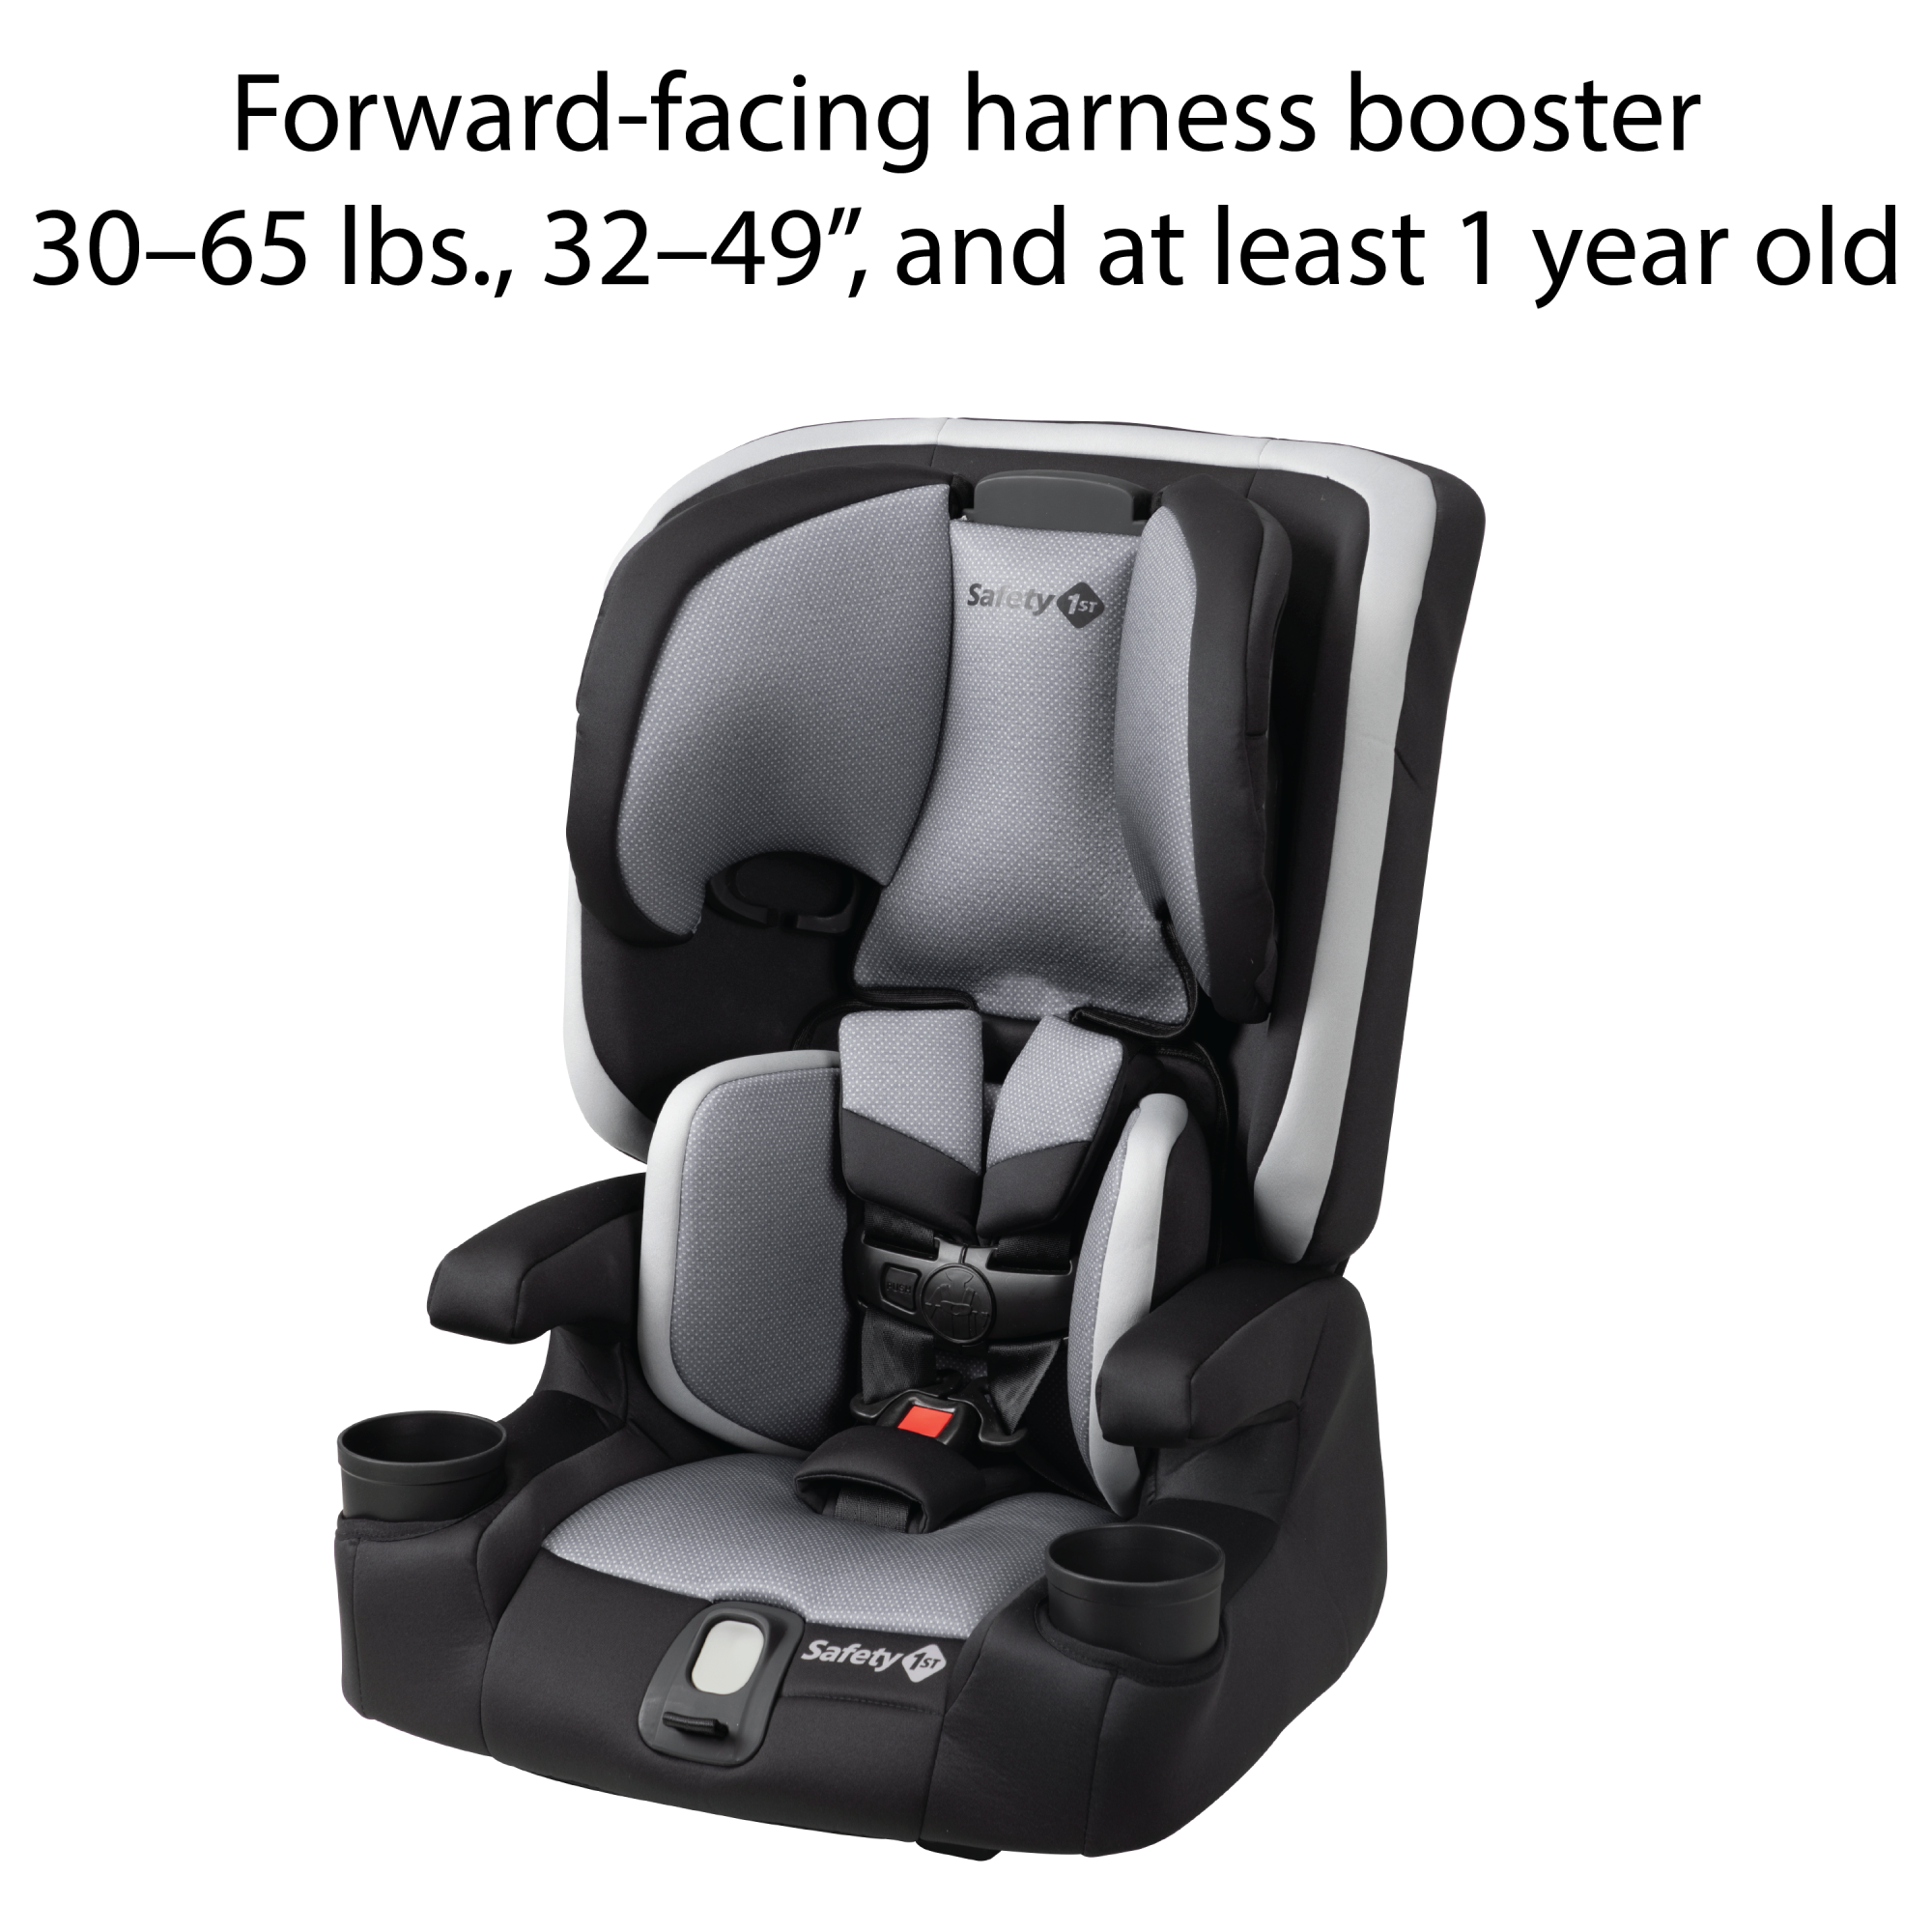 Boost-and-Go All-in-One Harness Booster Car Seat - fits 3 across the back seat in most vehicles